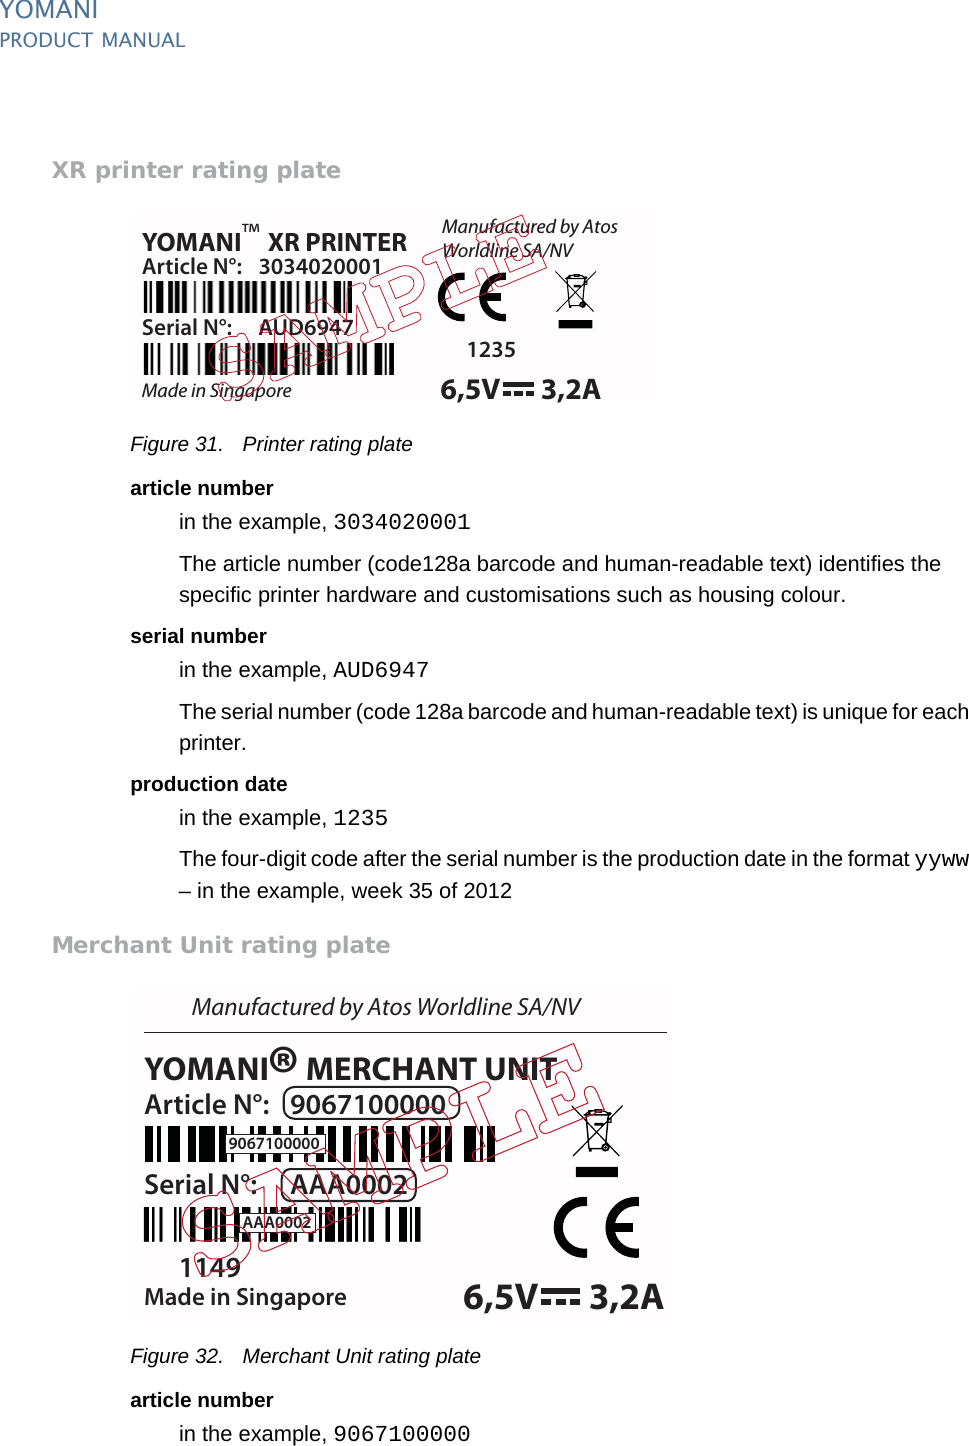 PUBLIC 37pm_ymn_logistics.fm document release 2.1 last updated 8/11/13YOMANIPRODUCT MANUALXR printer rating plateFigure 31. Printer rating platearticle numberin the example, 3034020001The article number (code128a barcode and human-readable text) identifies the specific printer hardware and customisations such as housing colour.serial numberin the example, AUD6947The serial number (code 128a barcode and human-readable text) is unique for each printer.production datein the example, 1235The four-digit code after the serial number is the production date in the format yyww – in the example, week 35 of 2012Merchant Unit rating plateFigure 32. Merchant Unit rating platearticle numberin the example, 9067100000YOMANI XR PRINTERManufactured by AtosWorldline SA/NVMade in SingaporeArticle N°: 3034020001Serial N°: AUD69471235™6,5V 3,2A6,5V 3,2AYOMANI MERCHANT UNITManufactured by Atos Worldline SA/NVMade in SingaporeArticle N°: 9067100000Serial N°: AAA00021149®9067100000AAA0002